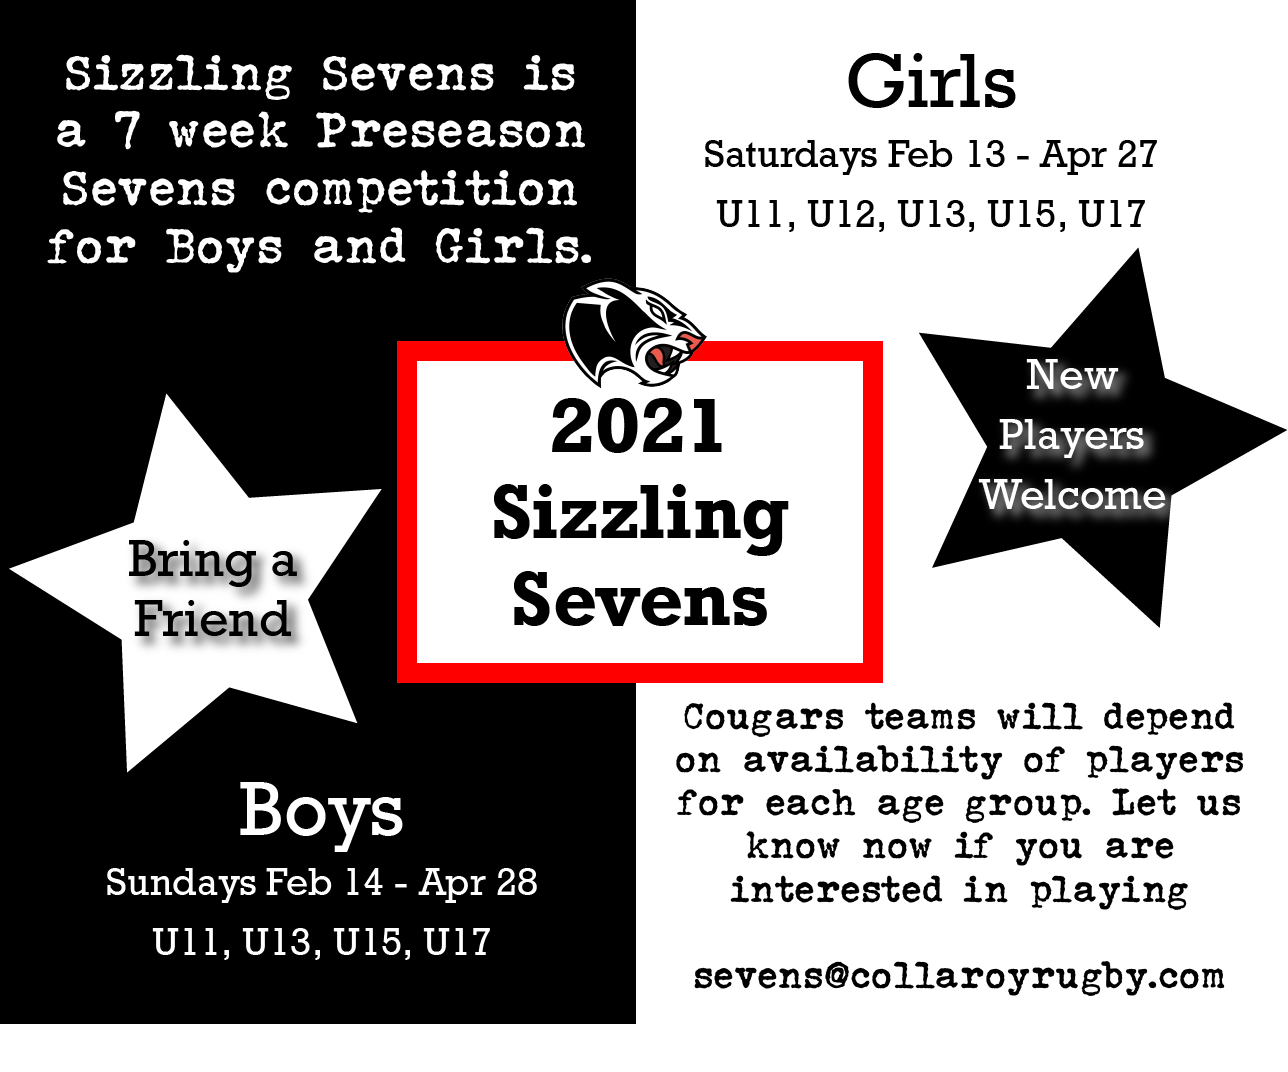 Sizzing Sevens starts in 3 weeks and thi